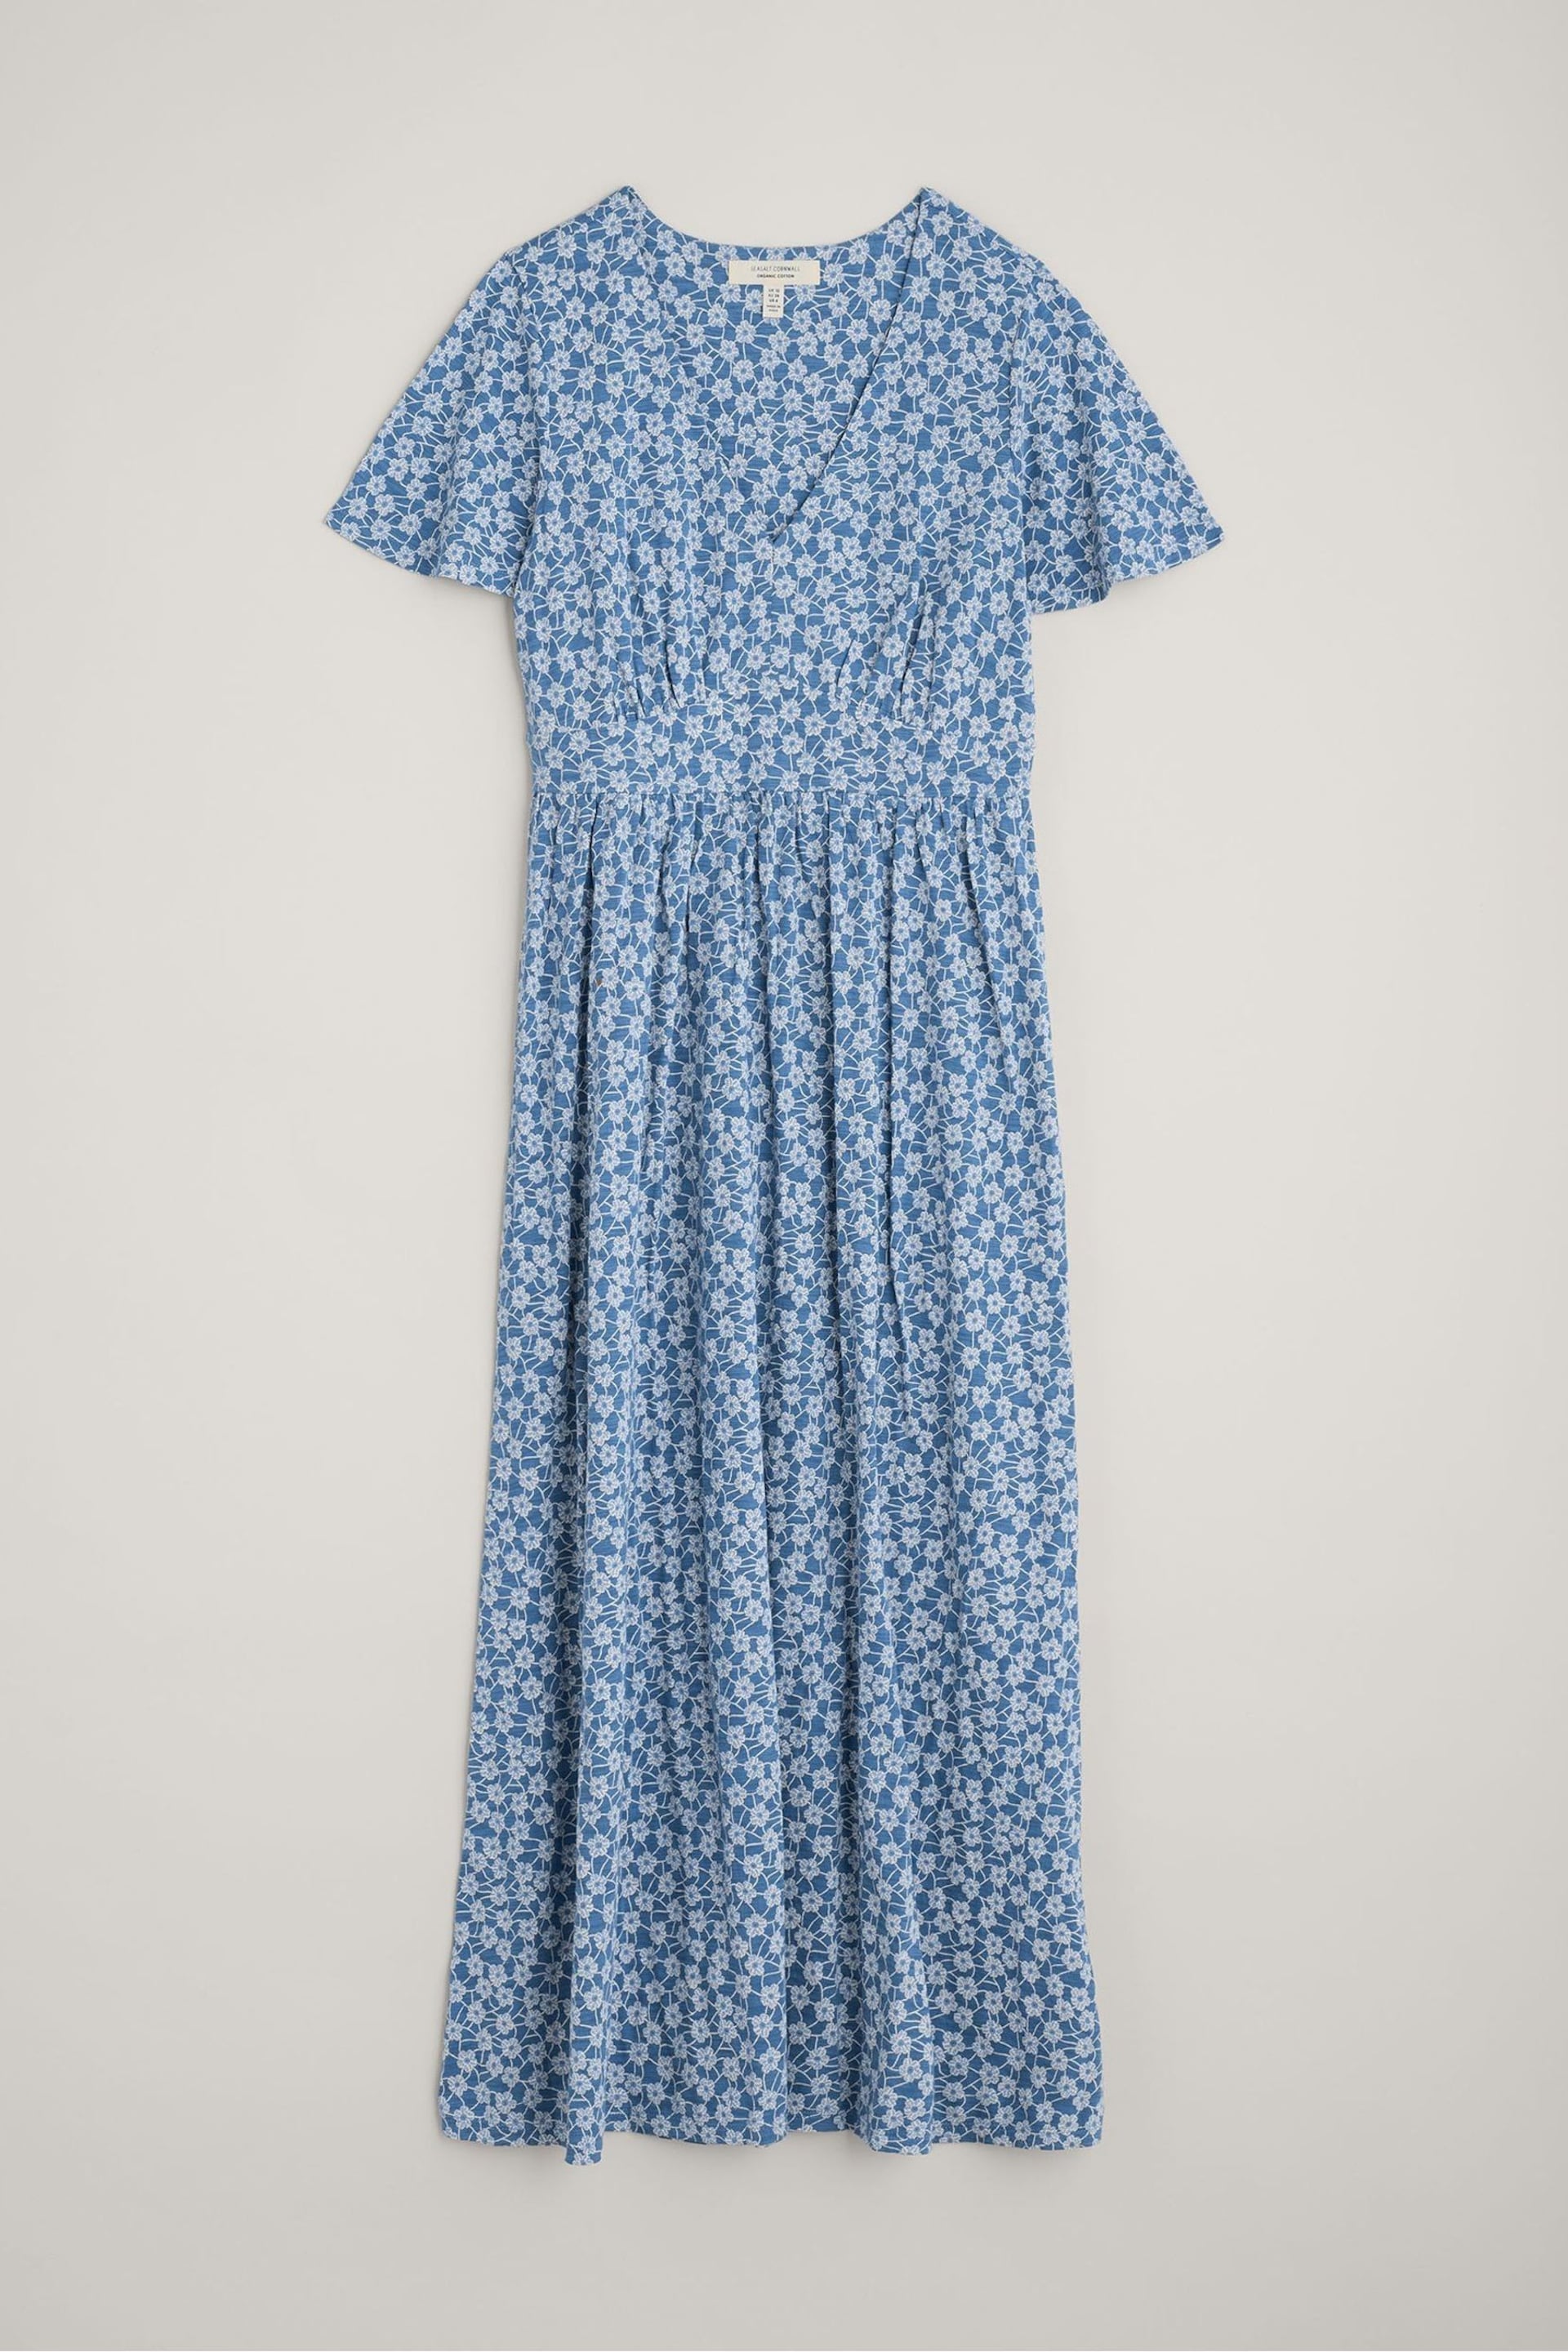 Seasalt Cornwall Blue Chateaux Dress - Image 4 of 5